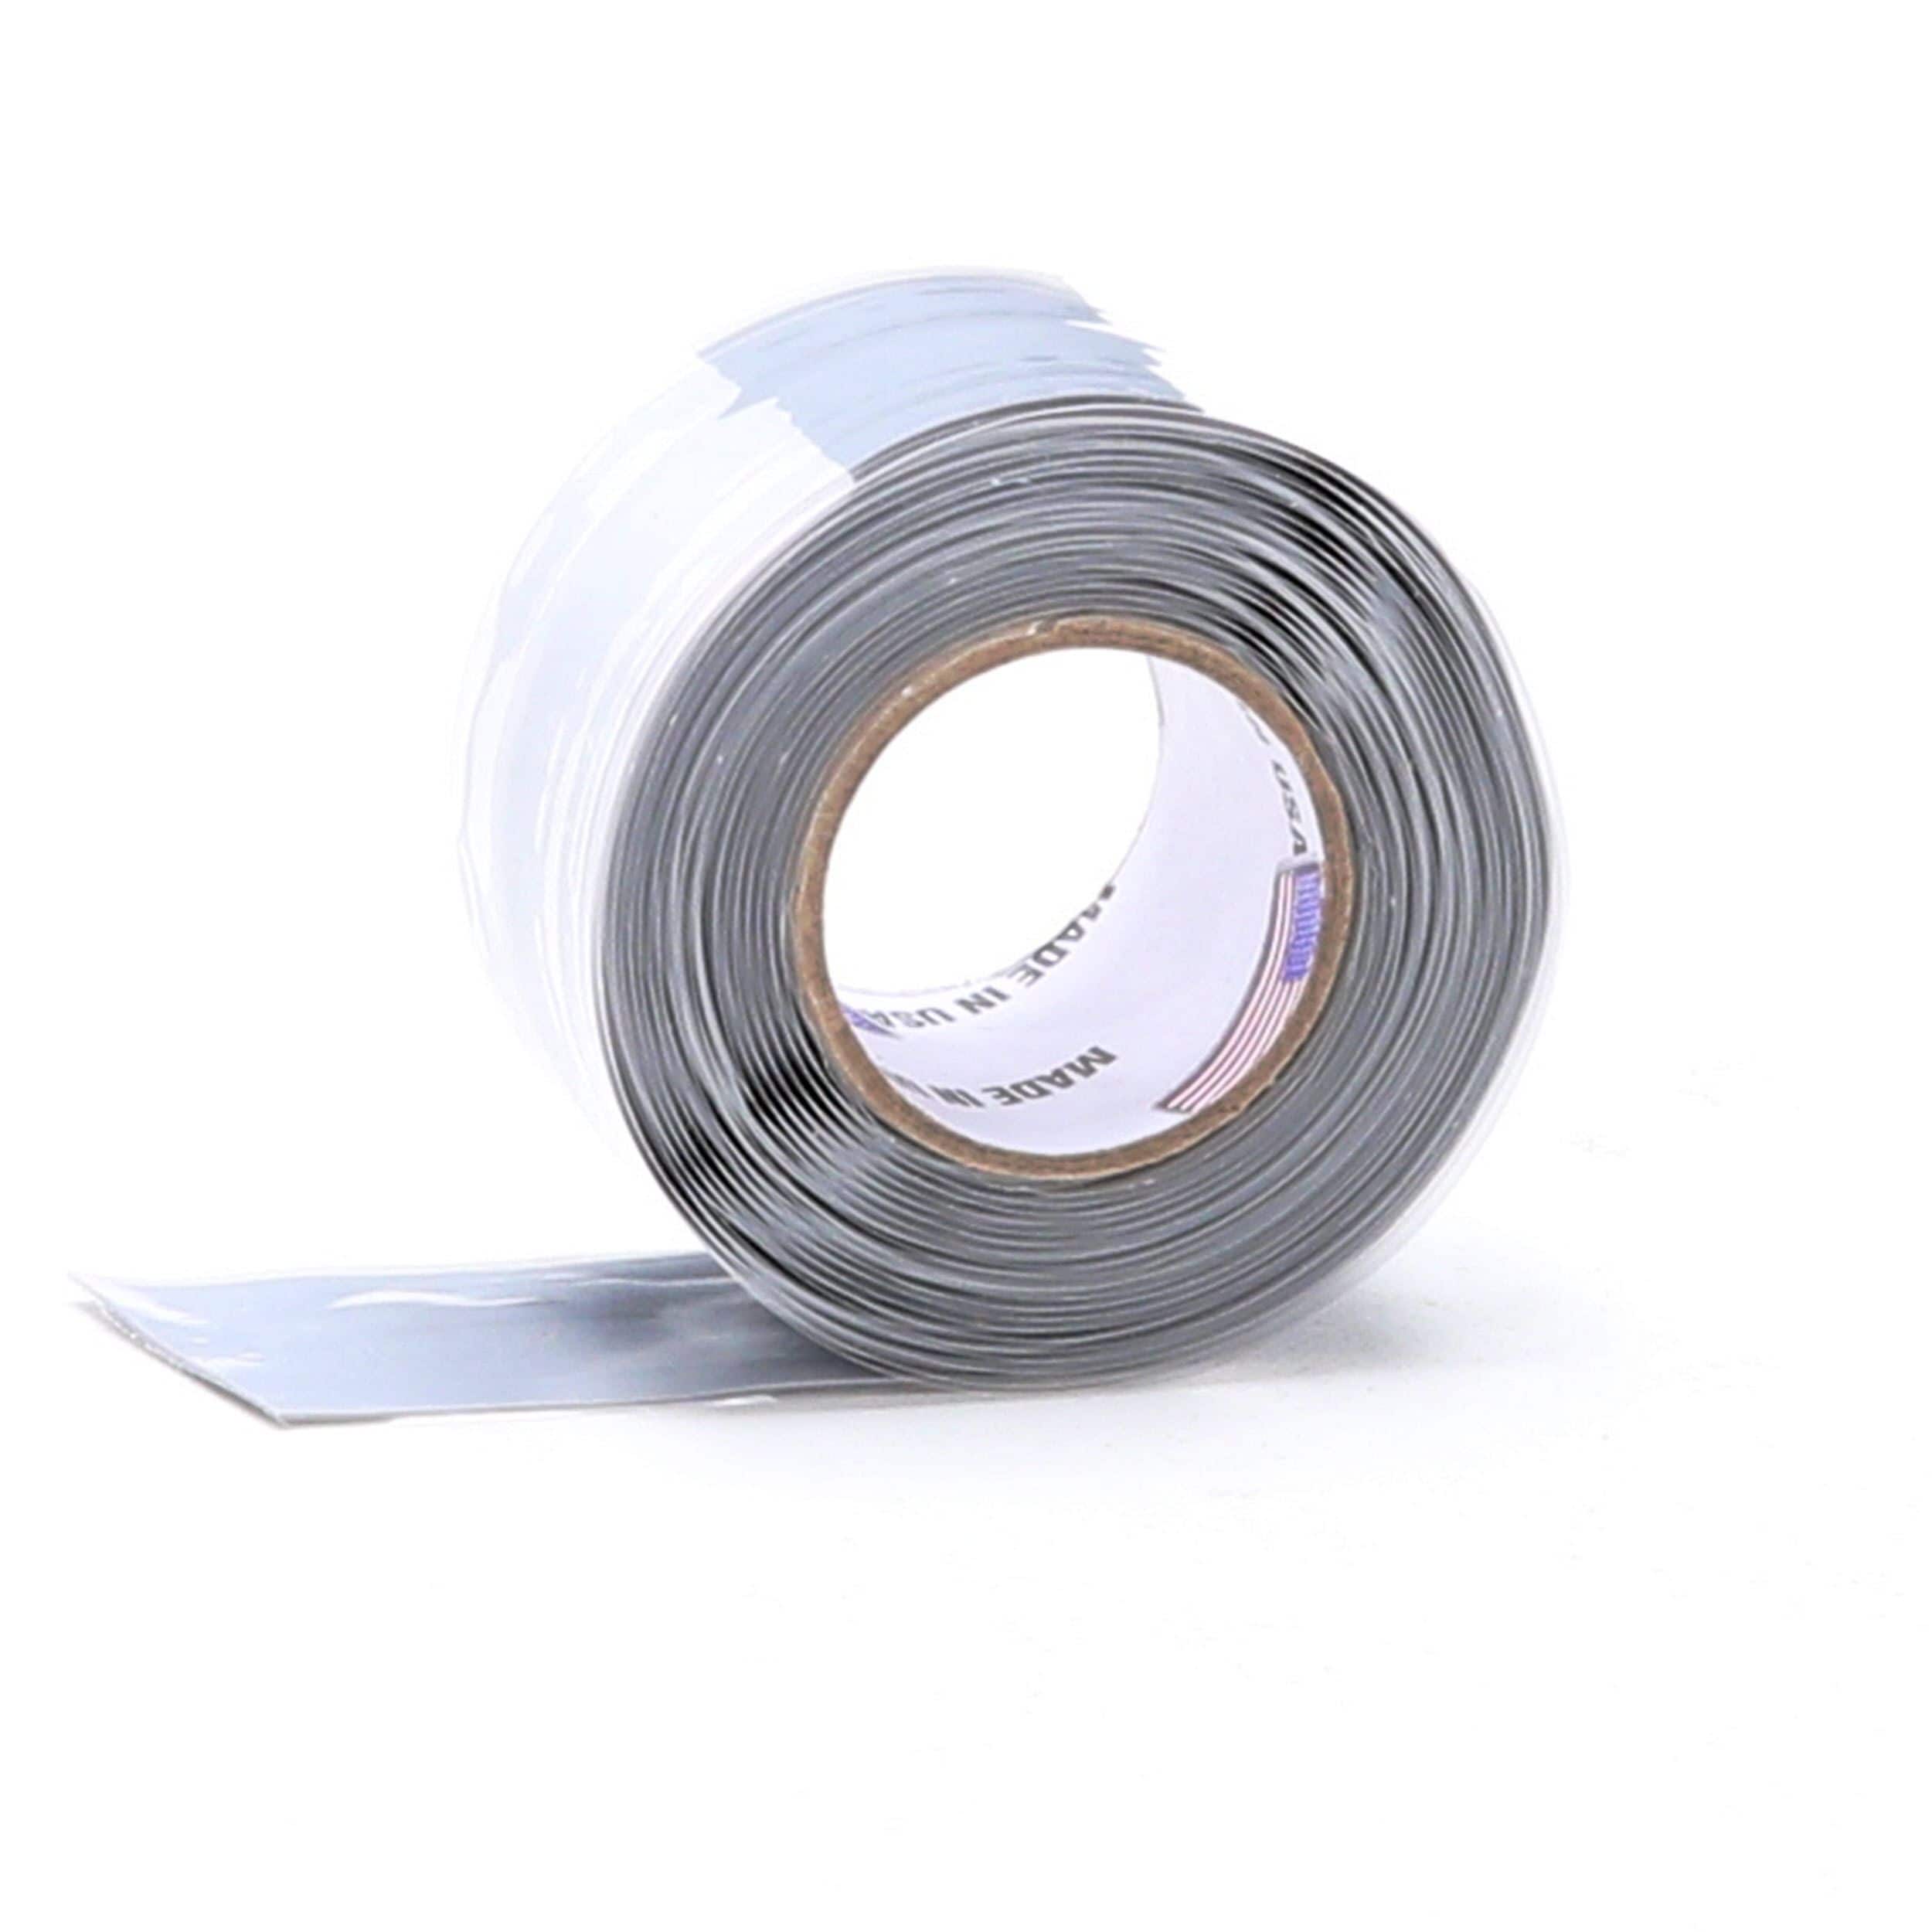 Keeney K855-3 Miracle Wrap Self-Fusing Silicone Tape 14' 